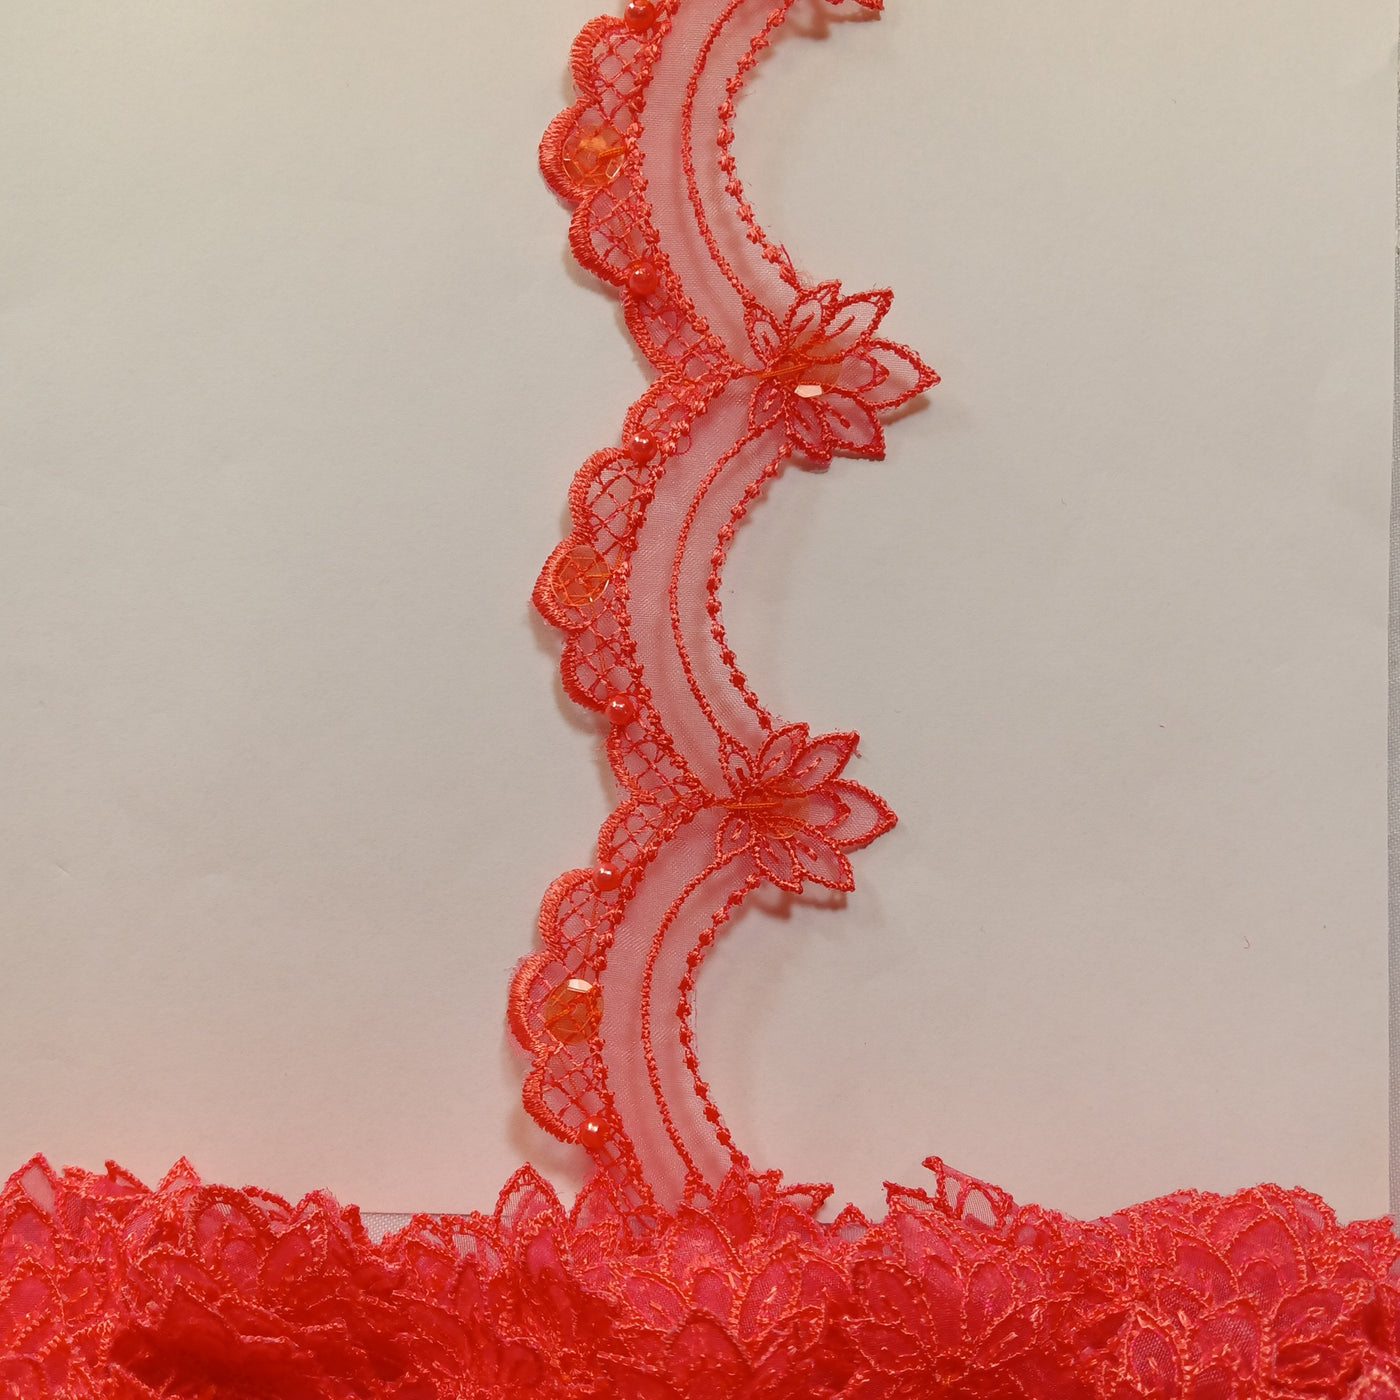 Beaded Coral Lace Trim Embroidered on 100% Polyester Organza . Large Arch Scalloped Trim. Formal Trim. Perfect for Edging and Gowns.  Sold by the Yard.  Lace Usa